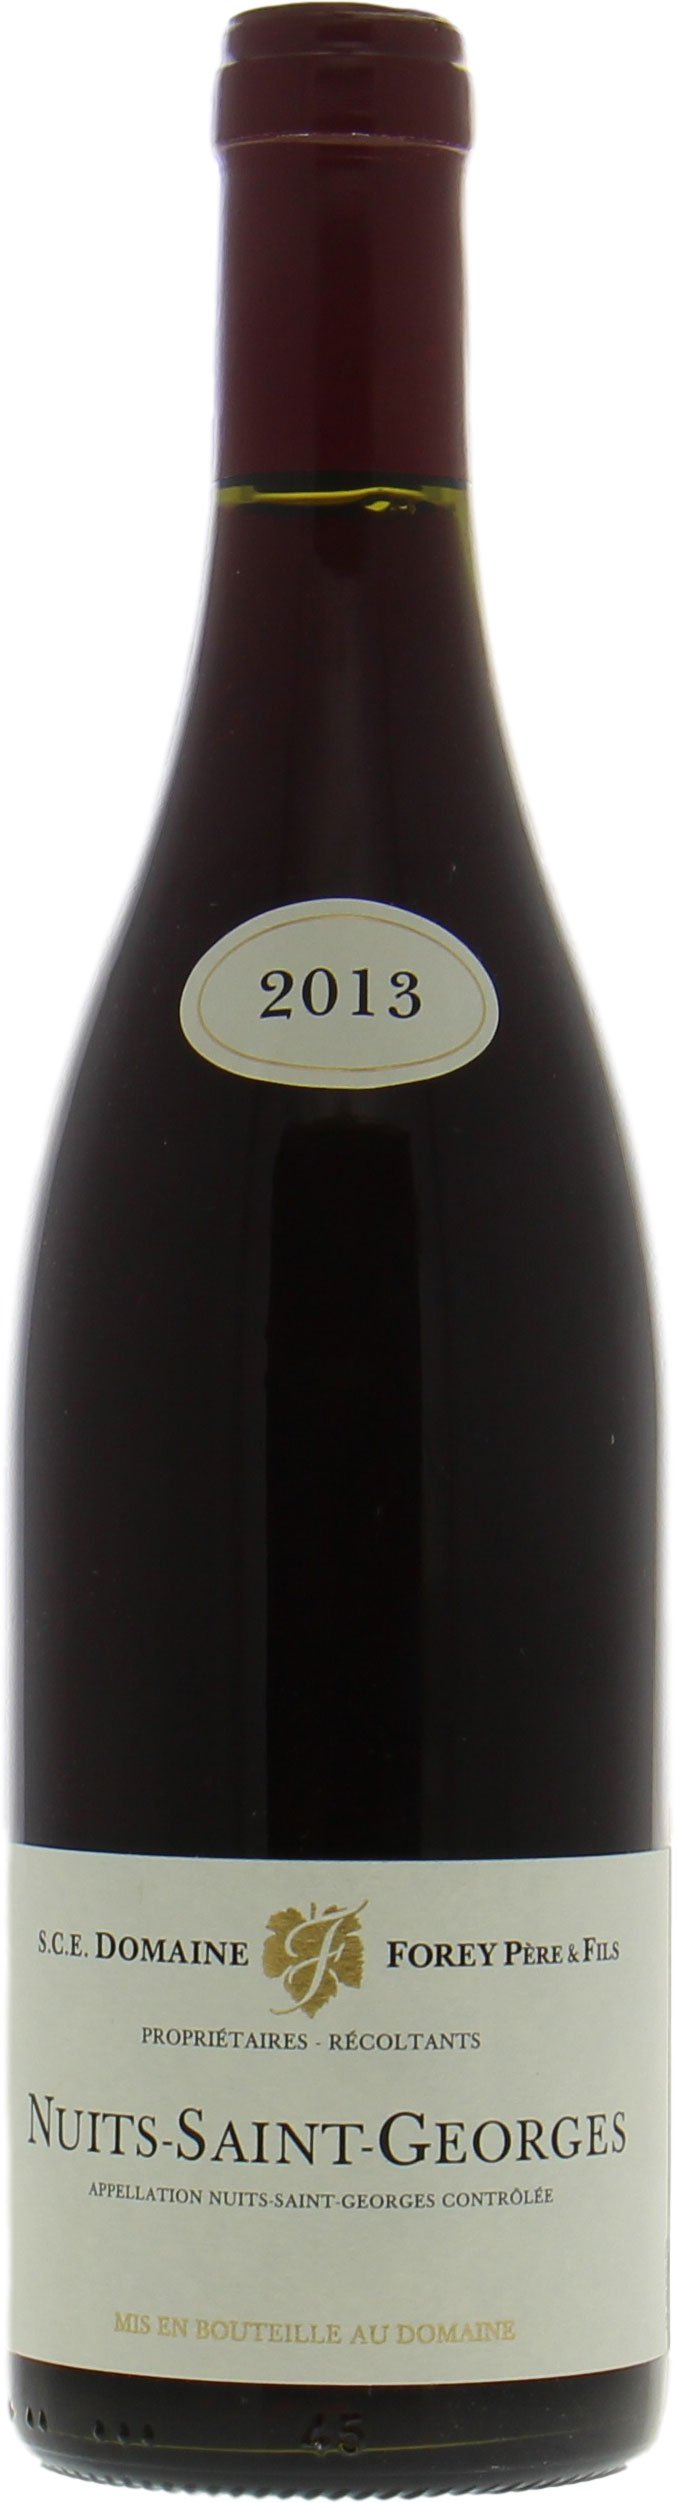 Domaine Forey Pere & Fils - Nuits St. Georges 2013